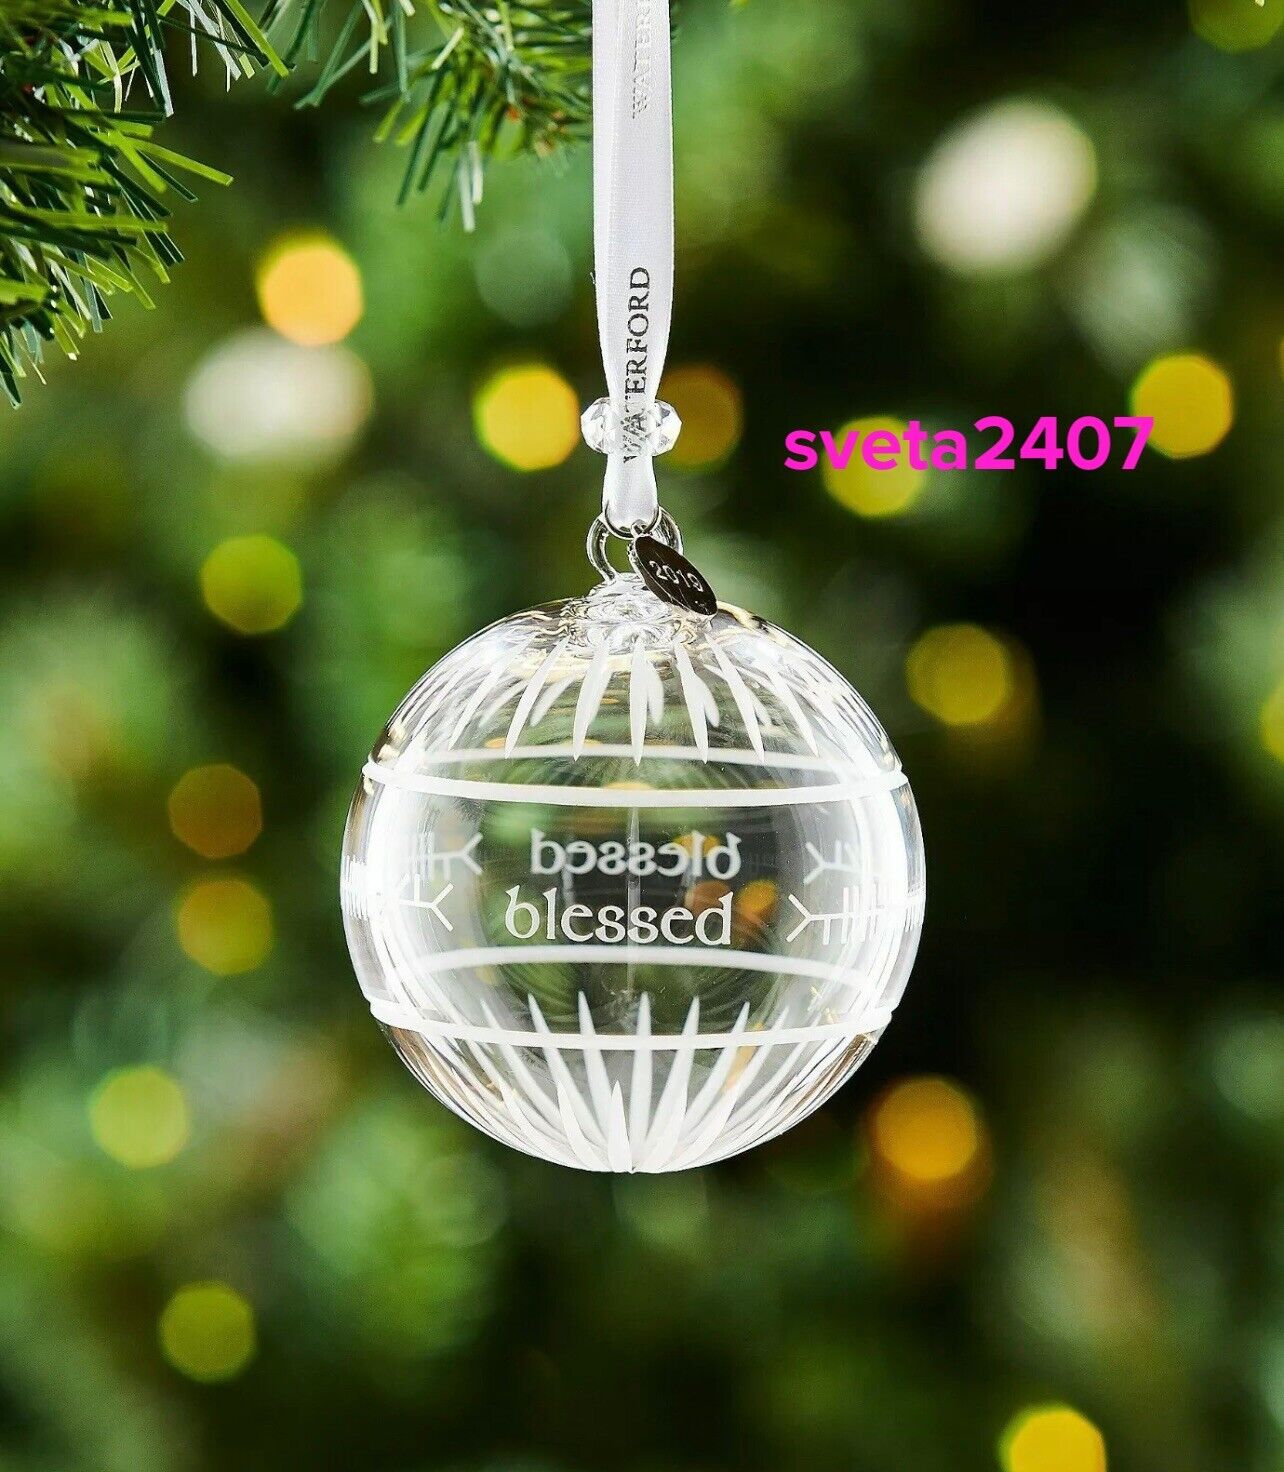 NIB Waterford “Blessed” Exquisite Brilliant Crystal Clear Ball Ornament 40035468